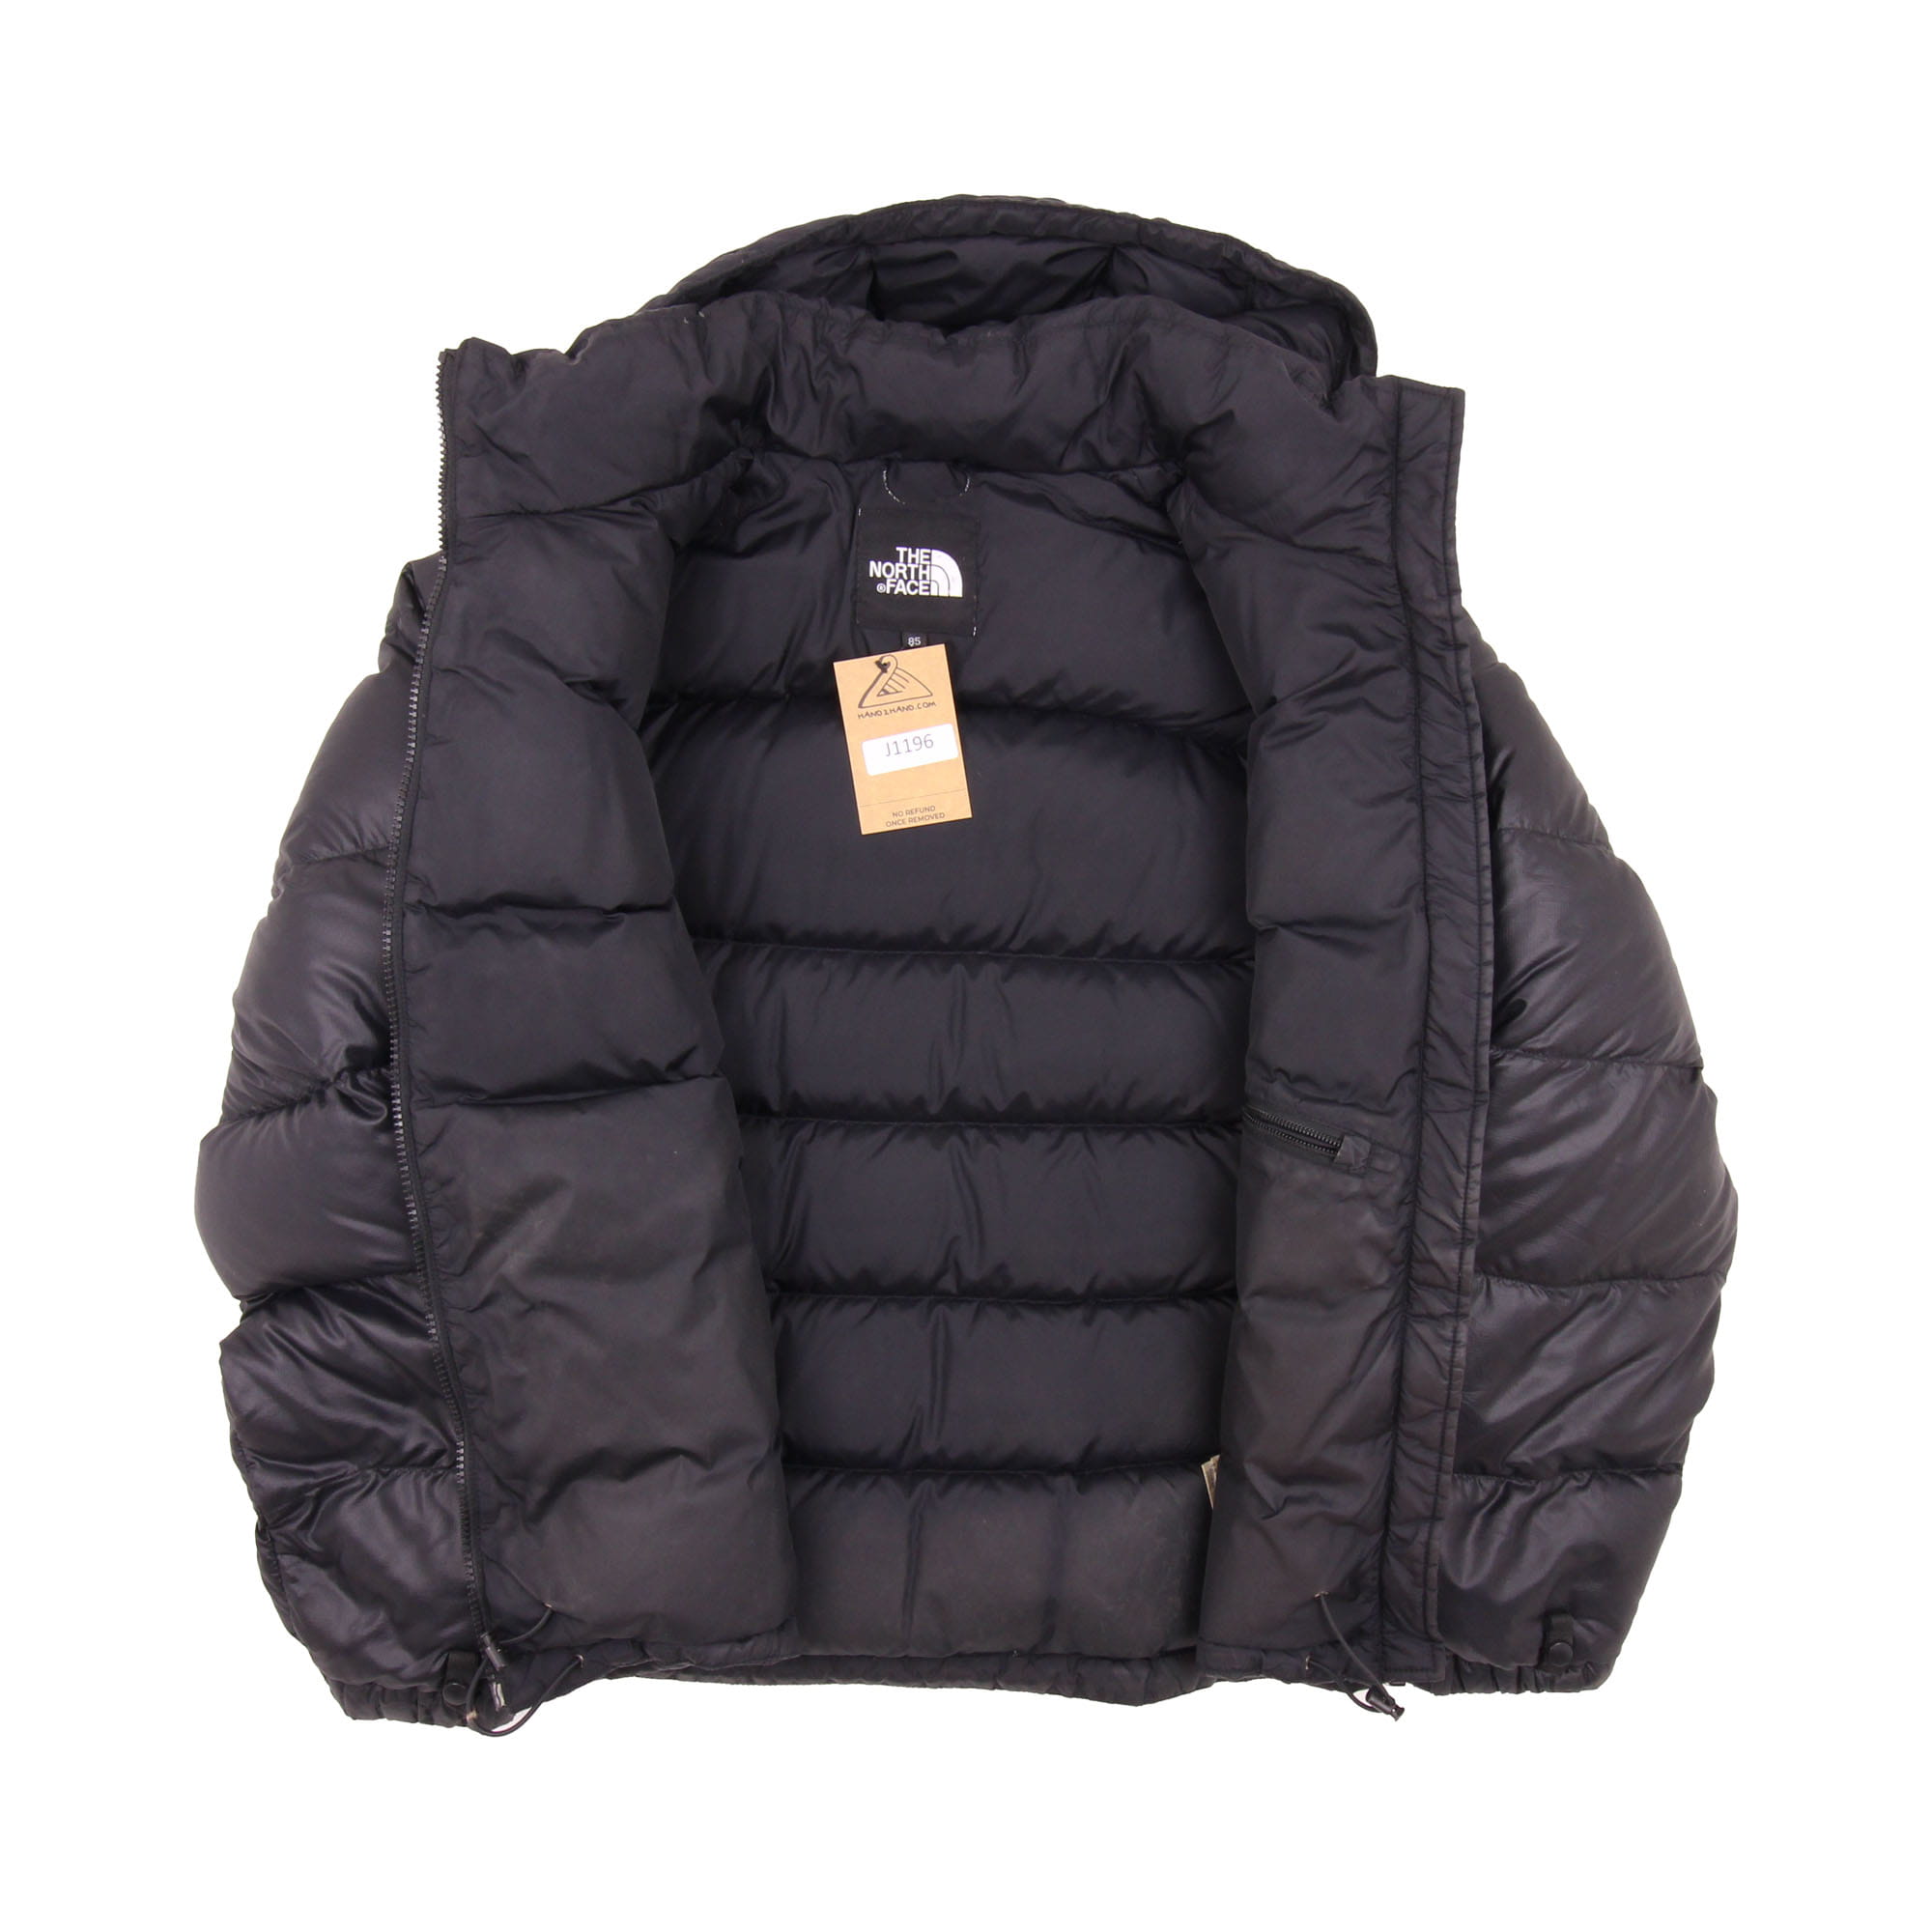 The North Face 700 Puffer Jacket Black -  S/M